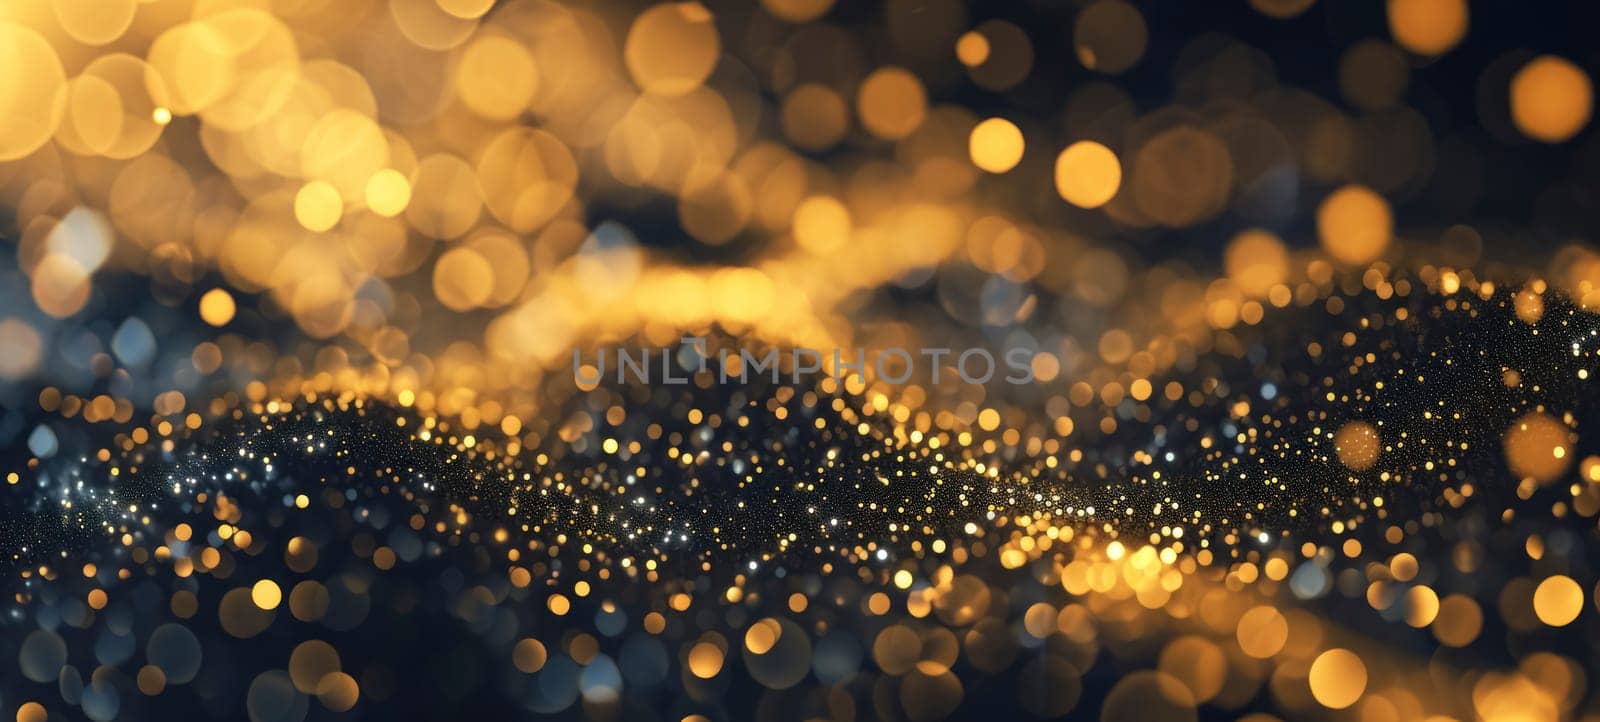 Abstract background of a golden sparkling particle wave, conveying luxury and celebration.